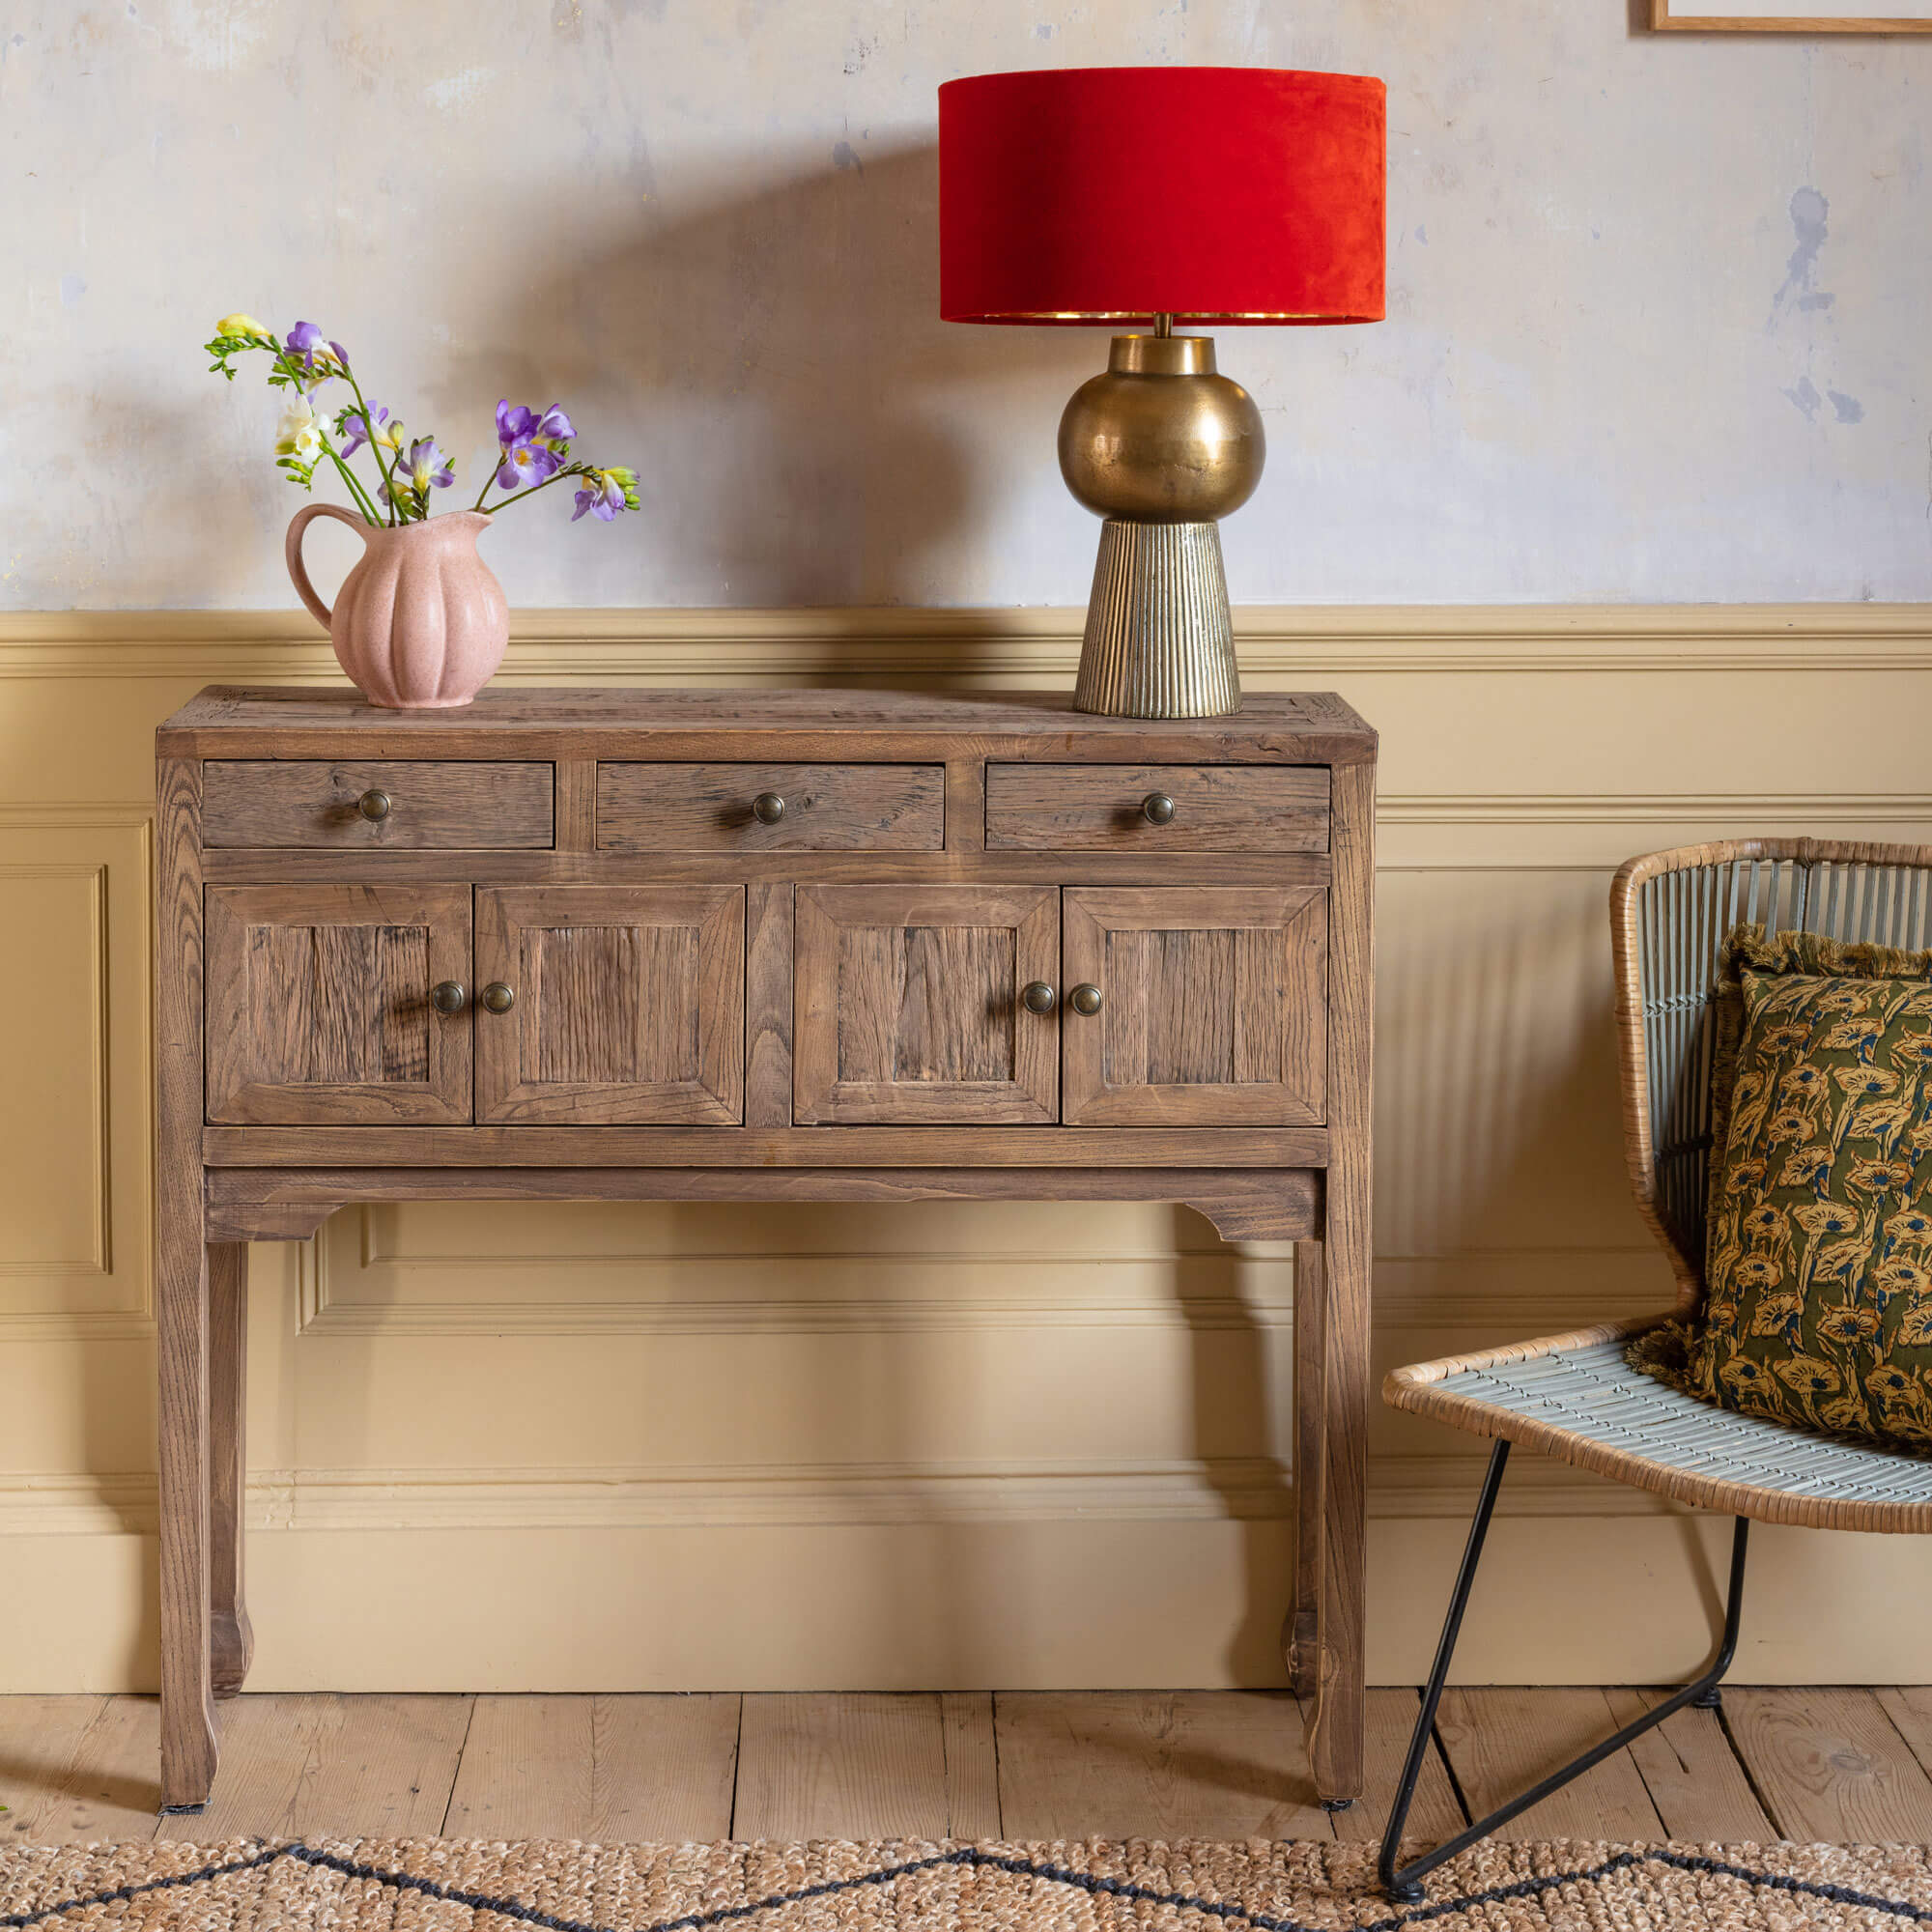 Read more about Graham and green oak four door console table